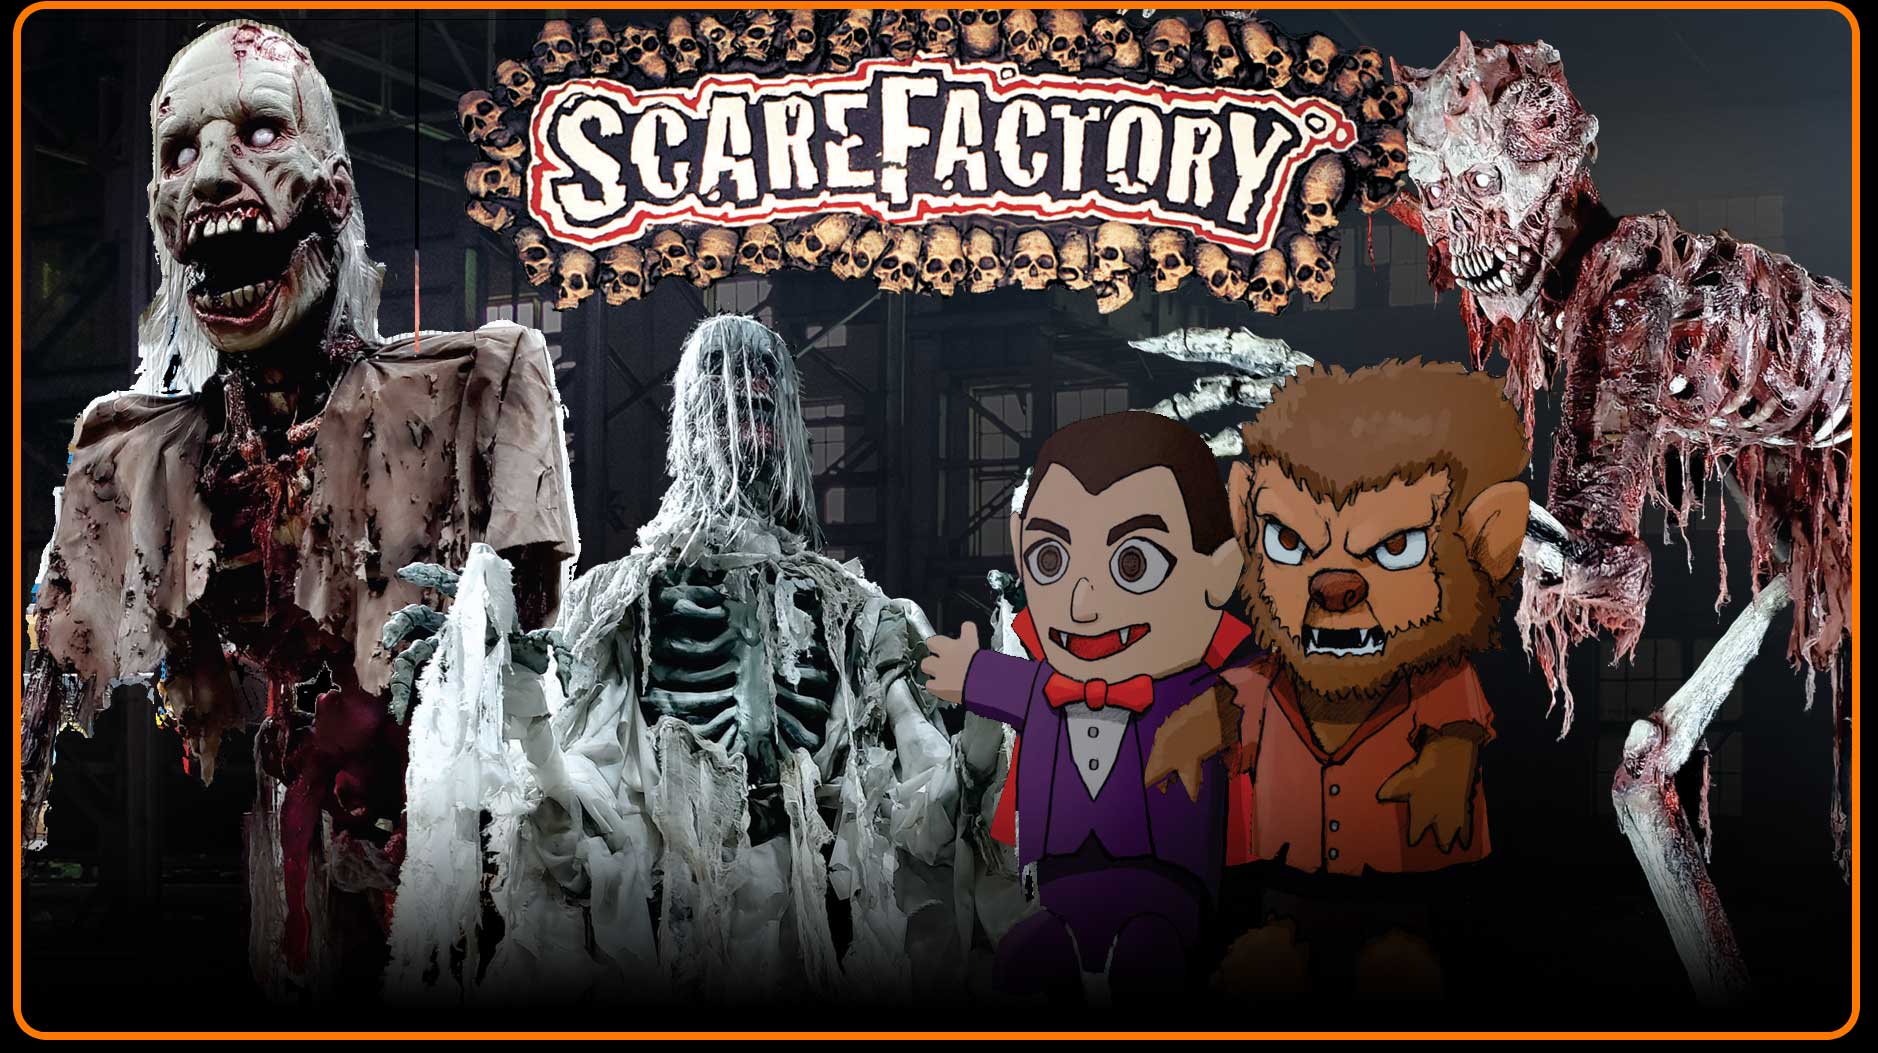 Scarefactory